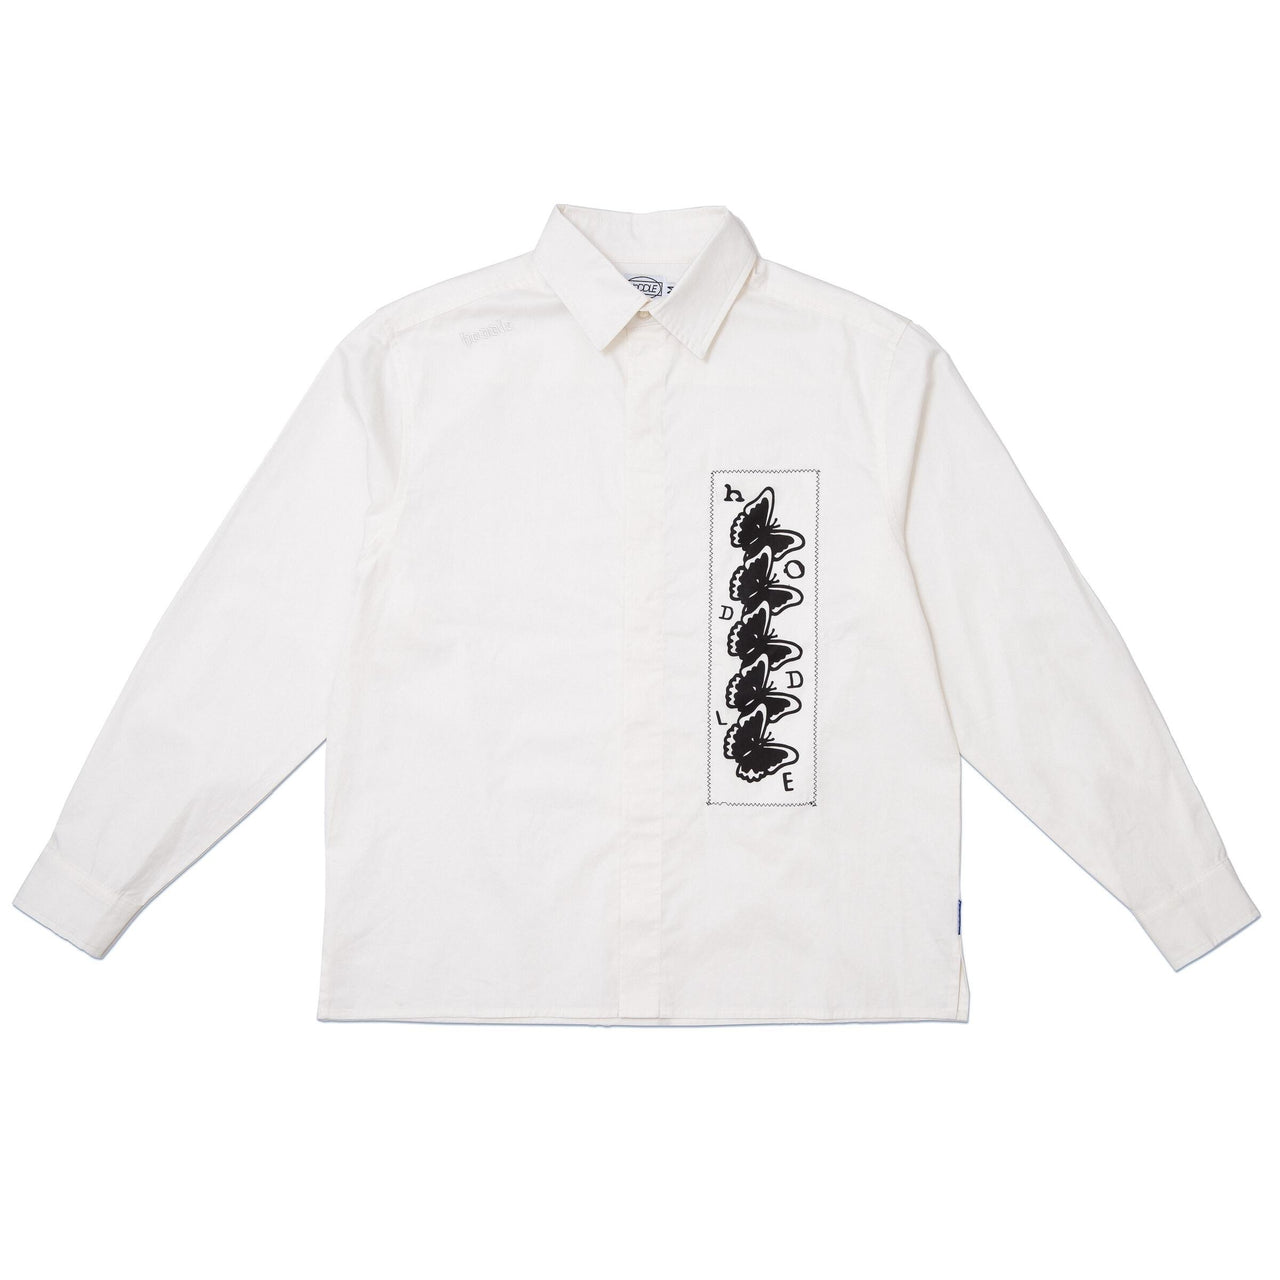 BUTTERFLY OXFORD SHIRT WHITE